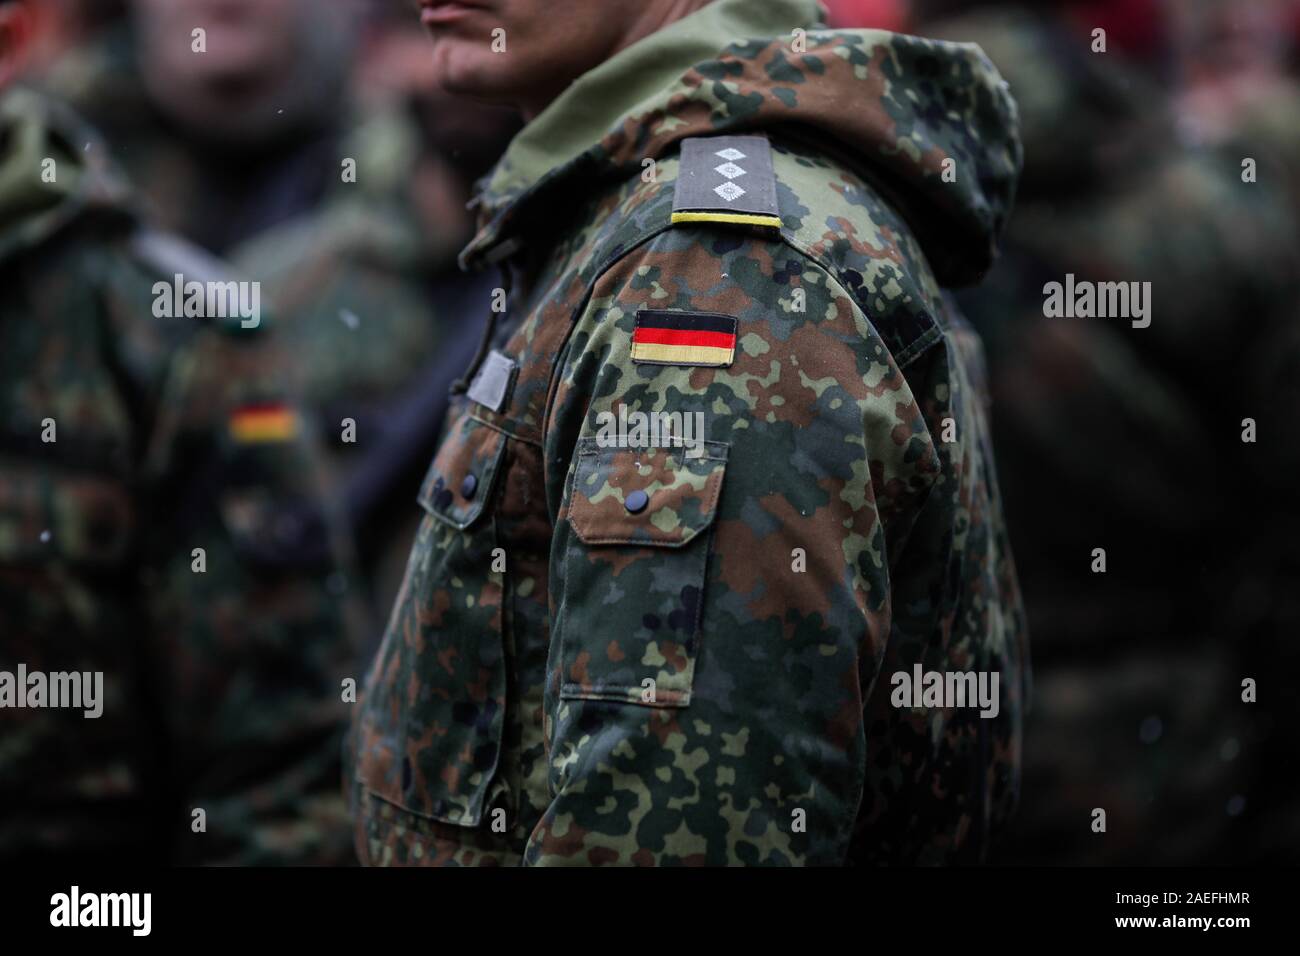 Details with the uniform and the flag on it of a German soldier taking part at the Romanian National Day military parade. Stock Photo